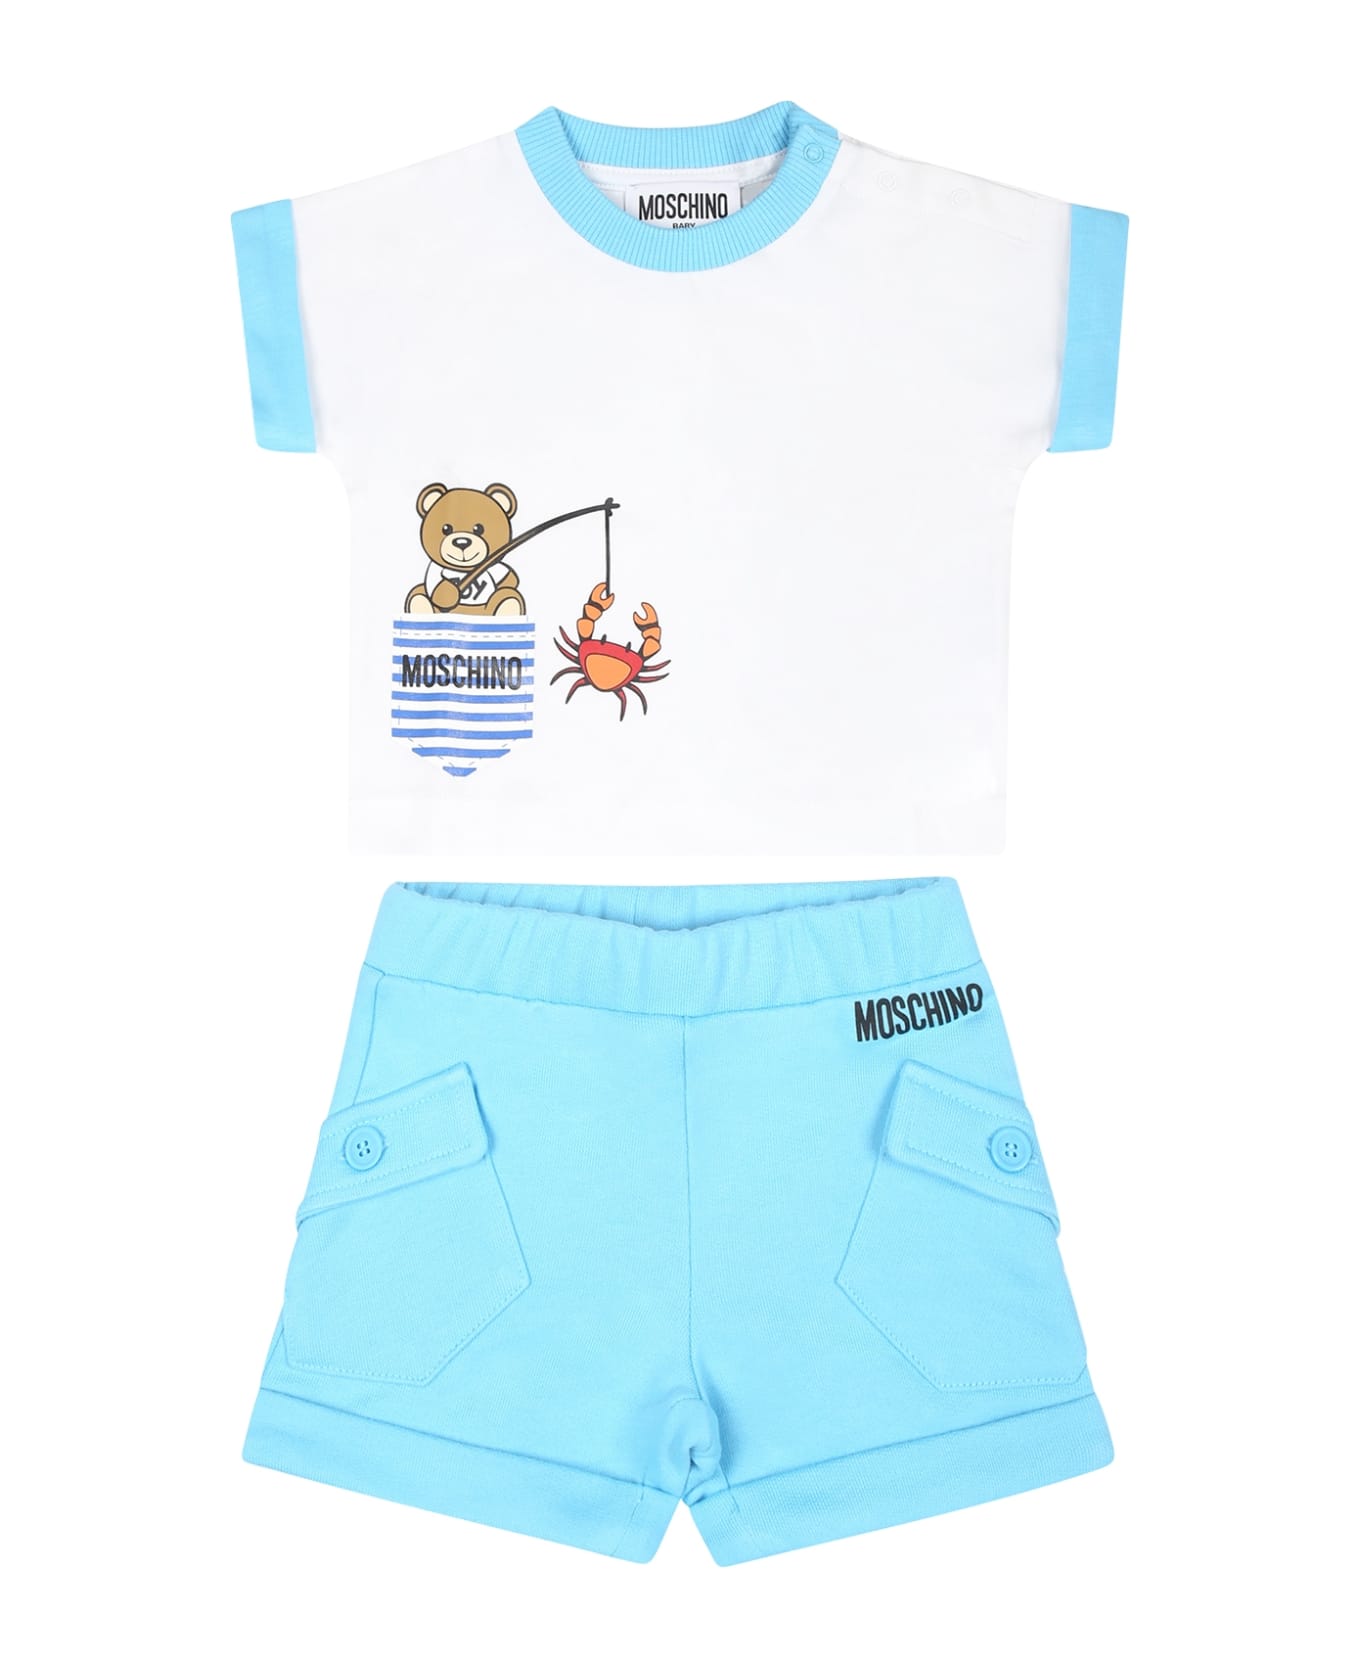 Moschino Light Blue Suit For Baby Boy With Teddy Bear - White